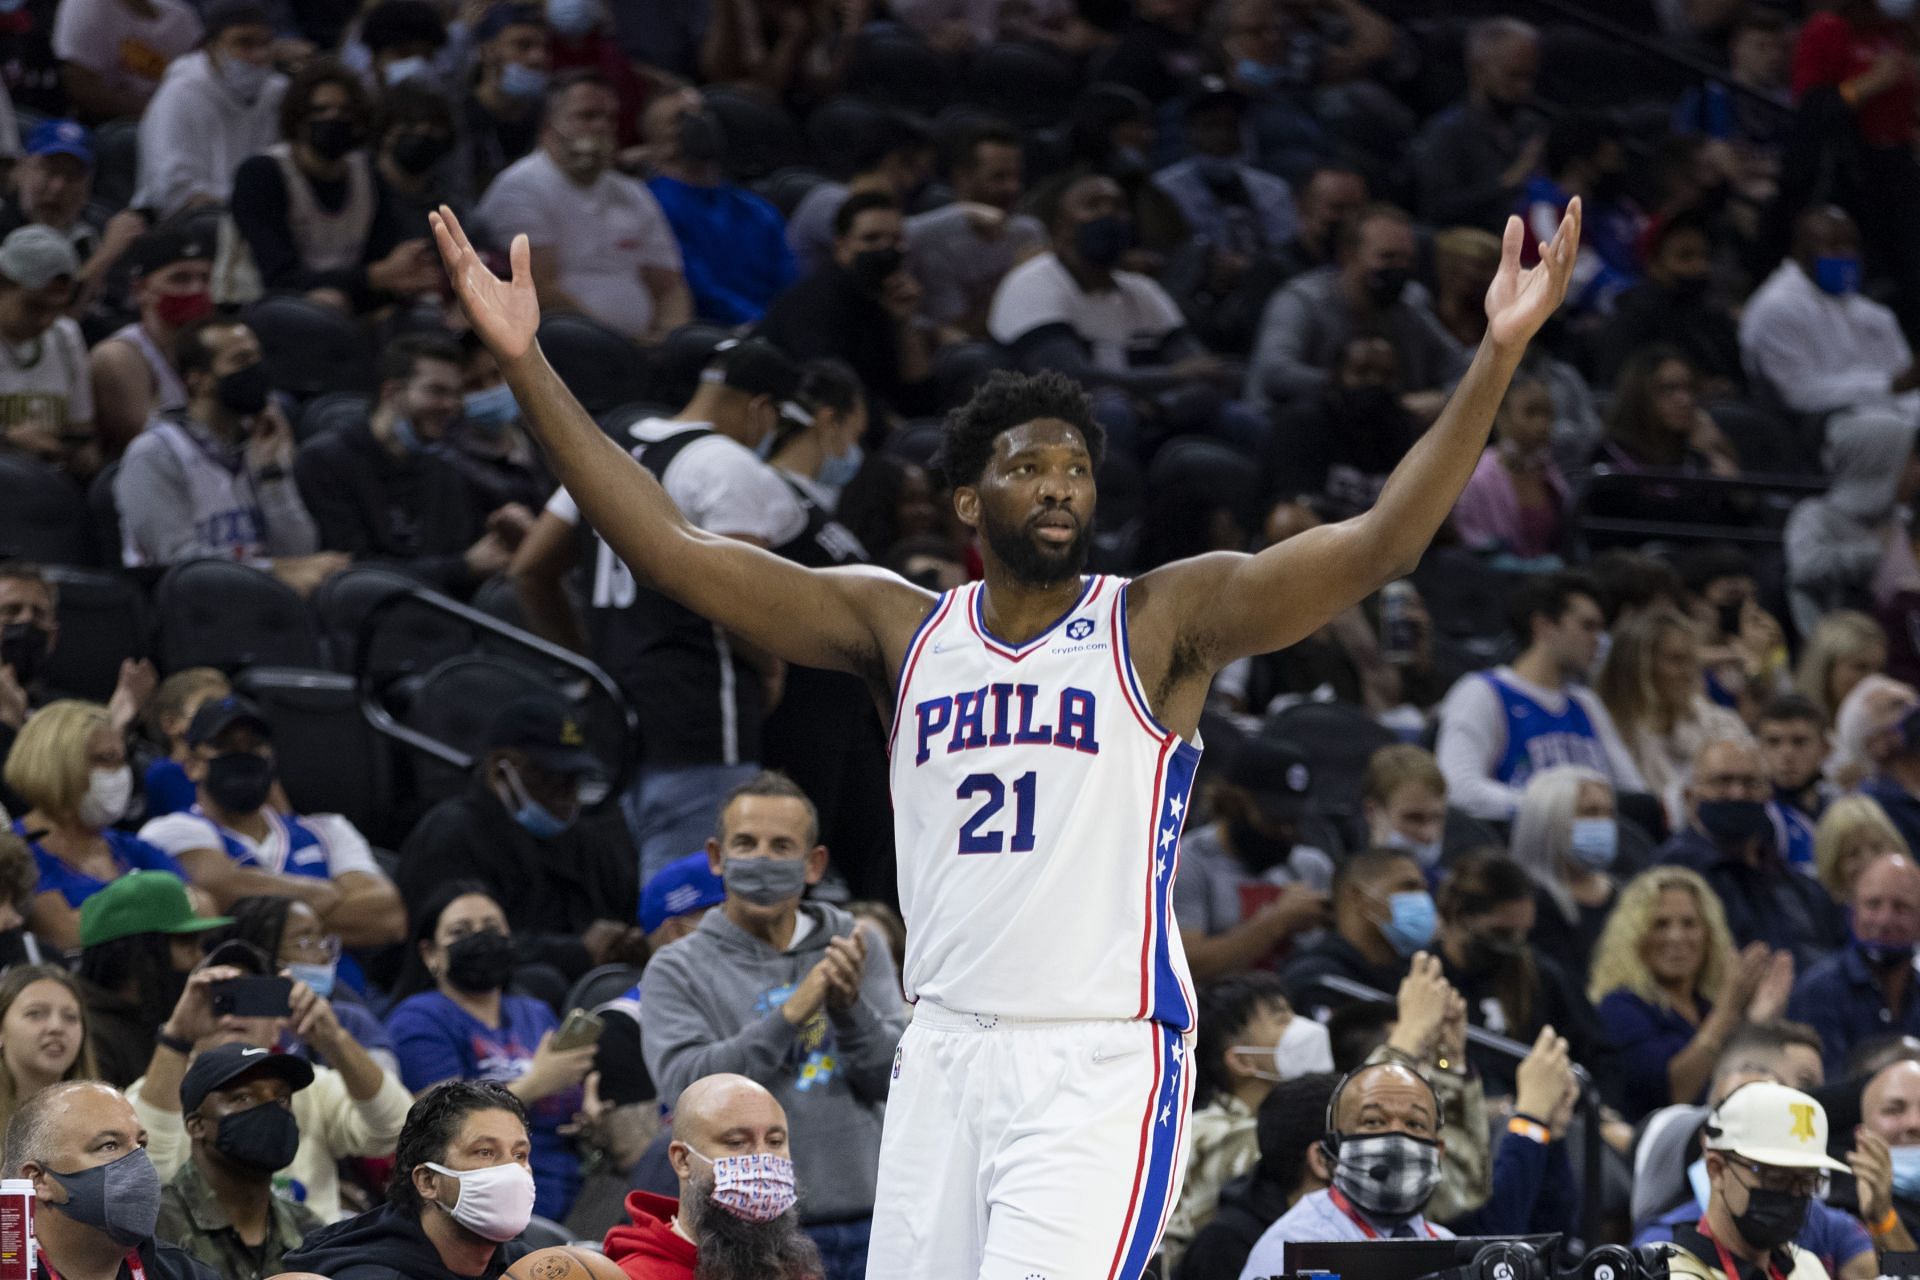 Joel Embiid will have a bigger load to carry this season for the Philadelphia 76ers without Ben Simmons.